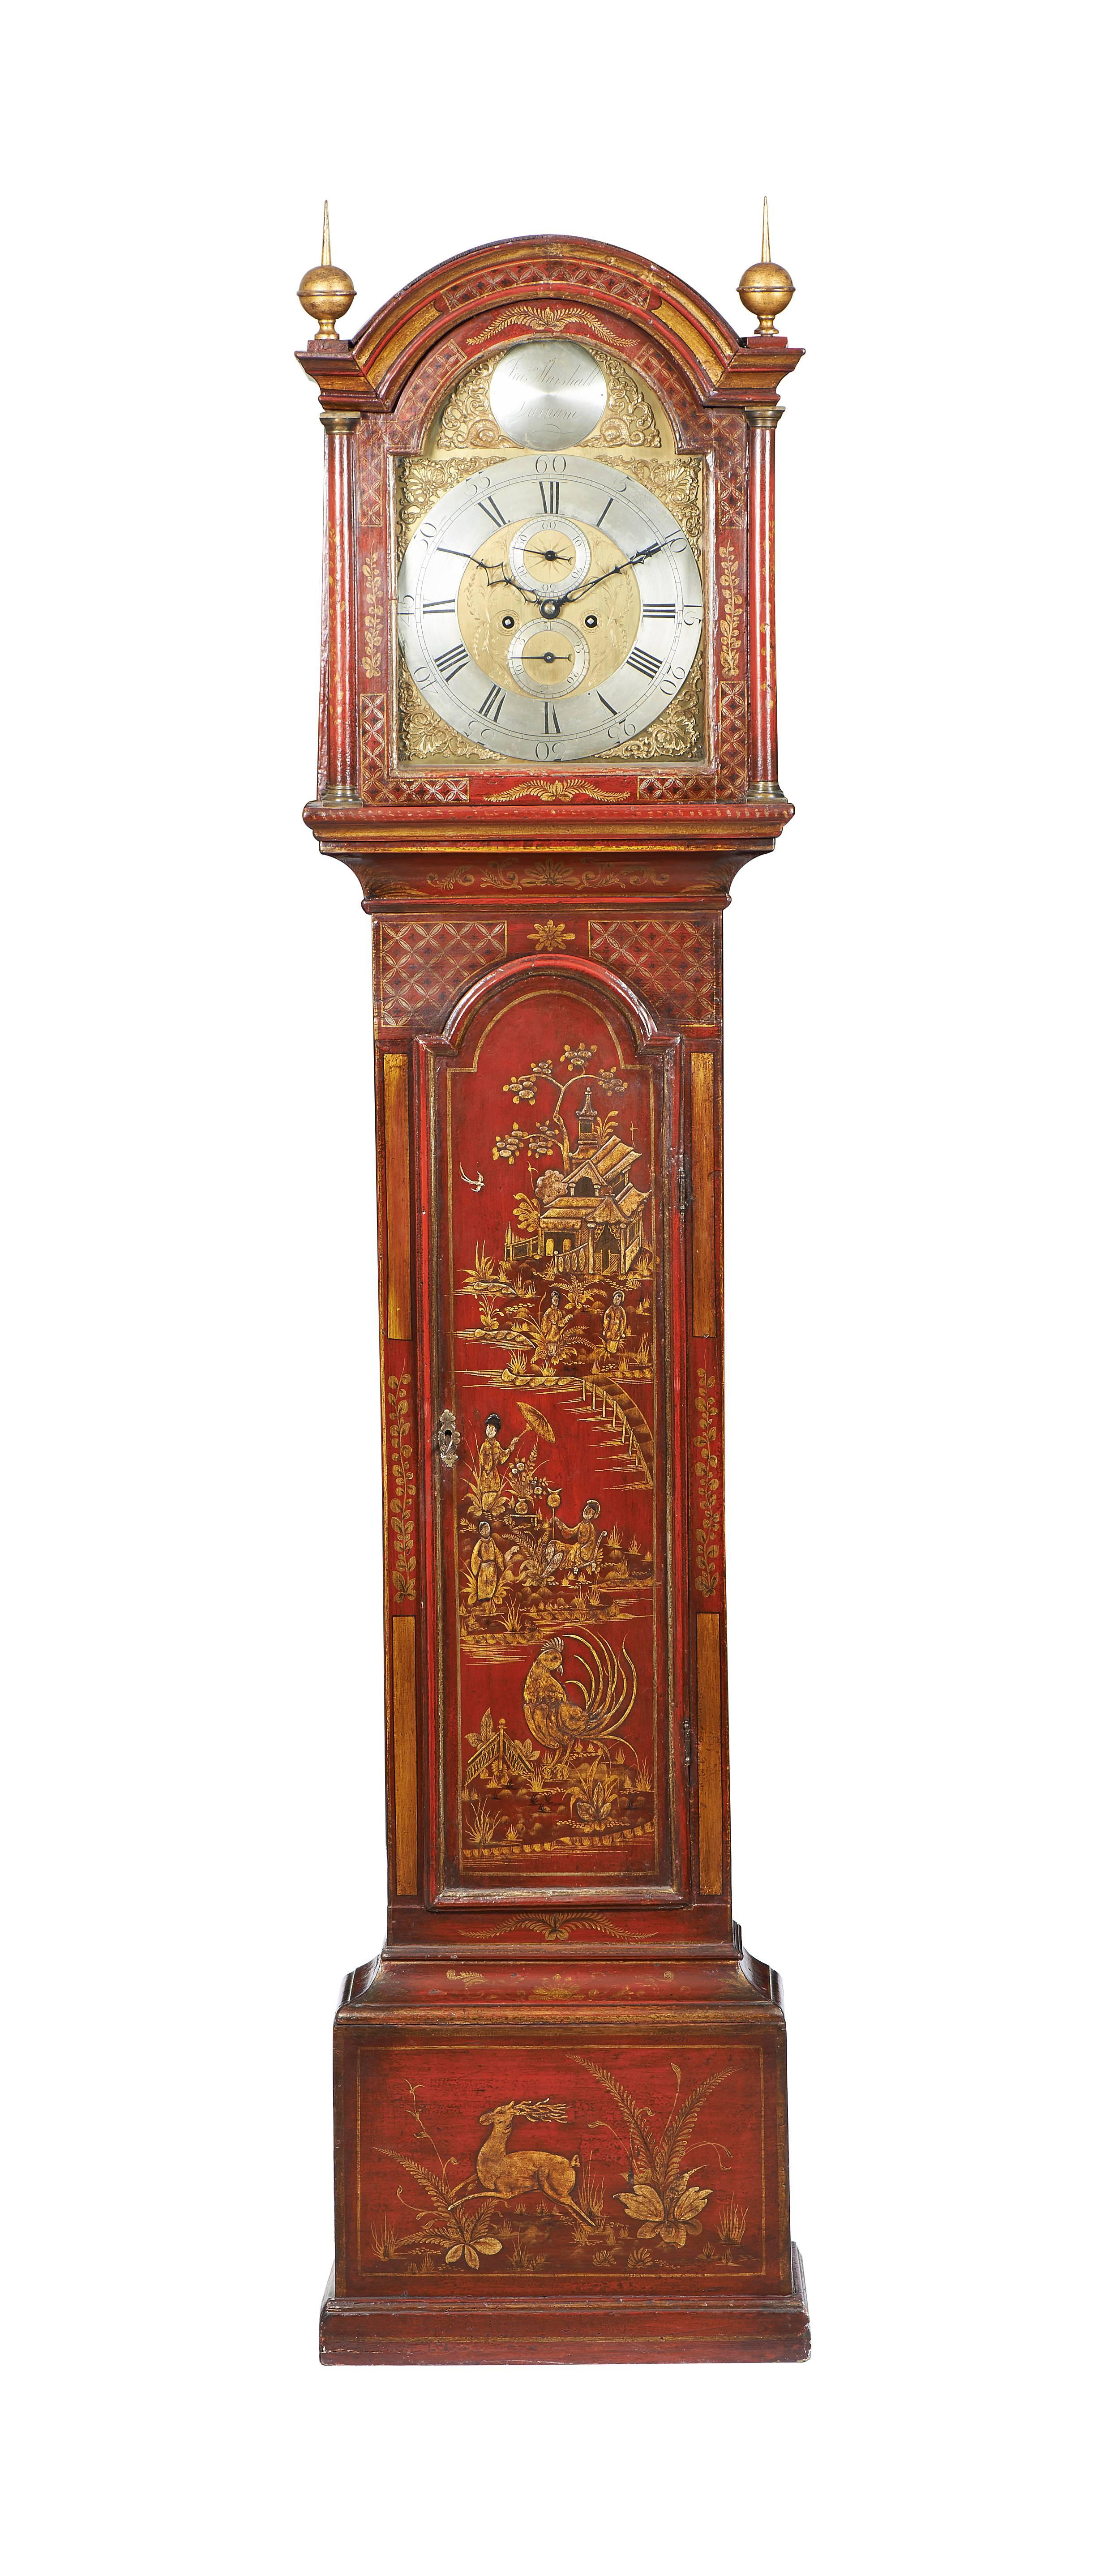 English Grandfather Clock with Red Chinoiserie Motifs from the 18th Century. This George III longcase clock has a 12 inch domed dial with gilt spandrels, a silverised face with Roman numerals with circular plaque marked Francis Marshall, Durham